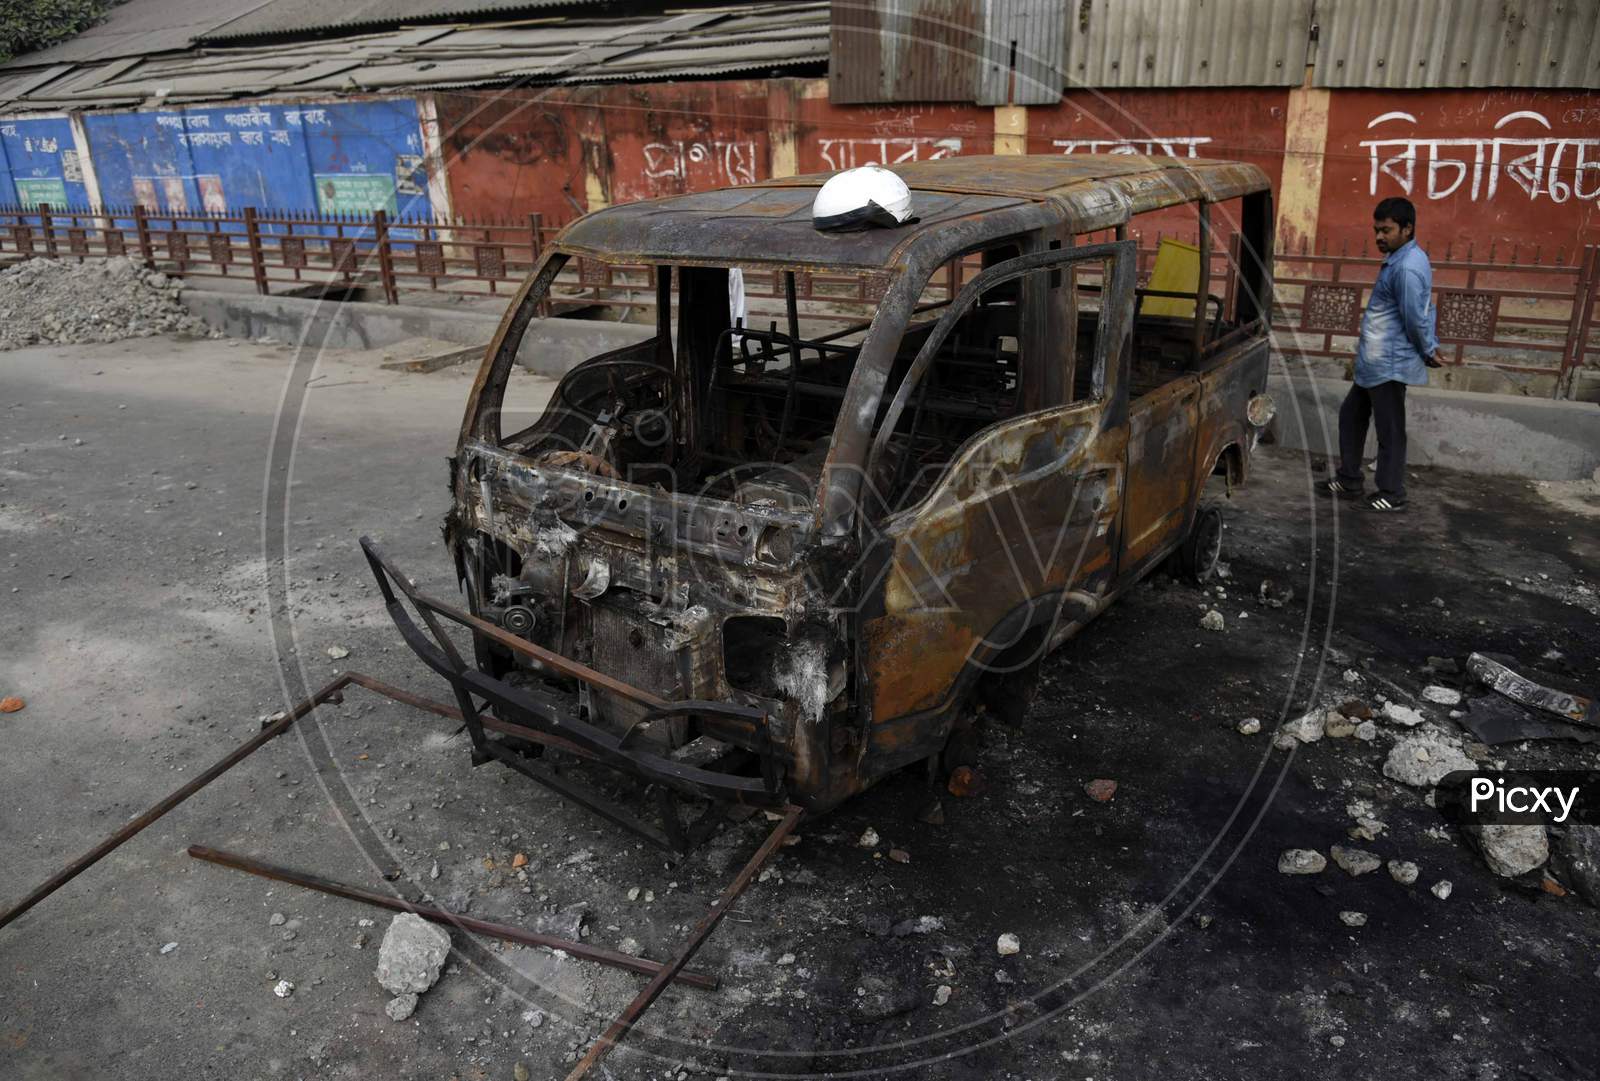 A Charred Vehicle Which Was Reportedly Set On Fire By The Protestors During A Demonstration Against The Citizenship Amendment Bill, In Guwahati